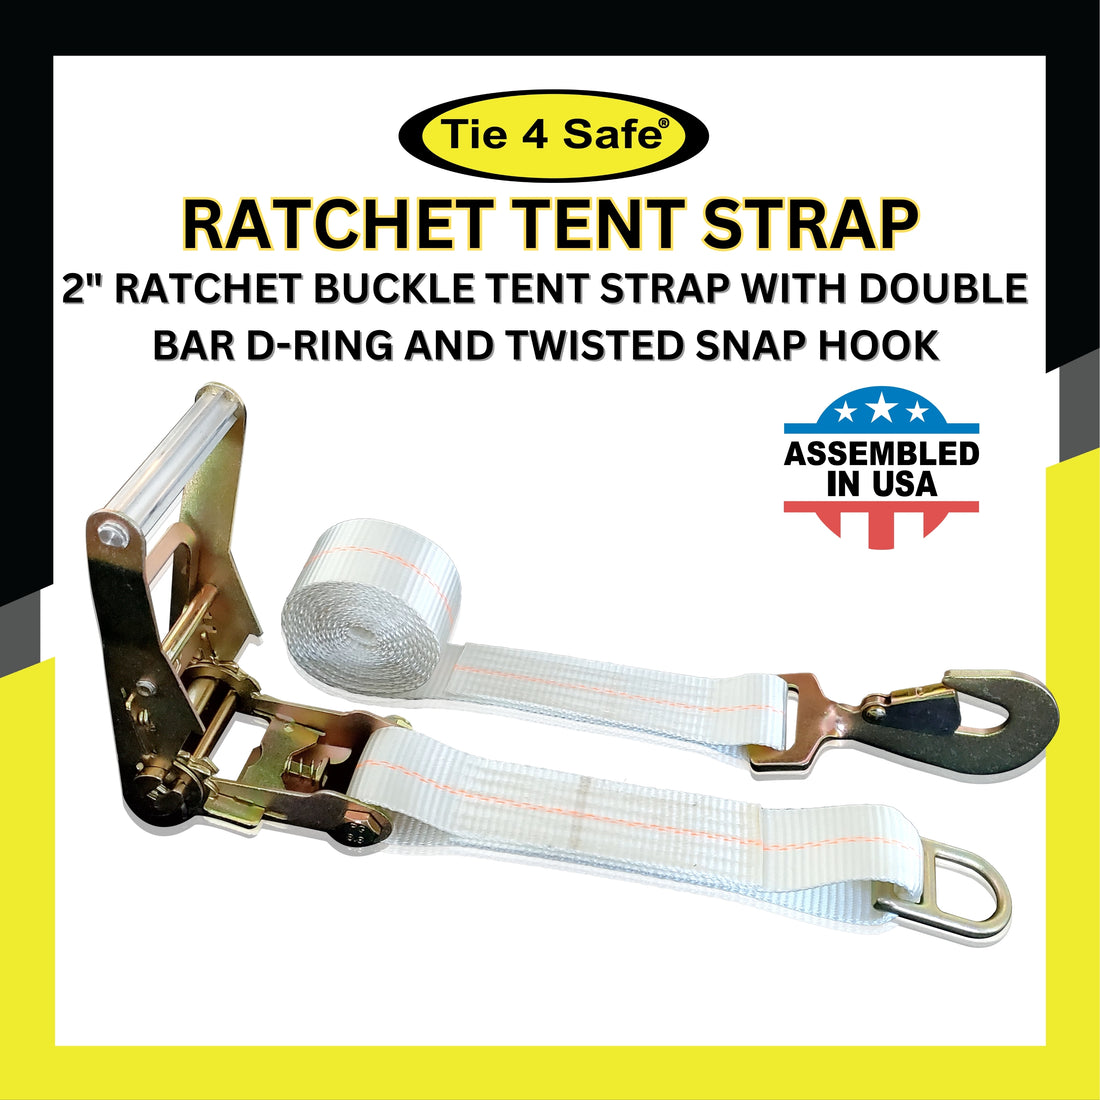 2" Ratchet Buckle Tent Strap With Double Bar D-Ring And Twisted Snap Hook